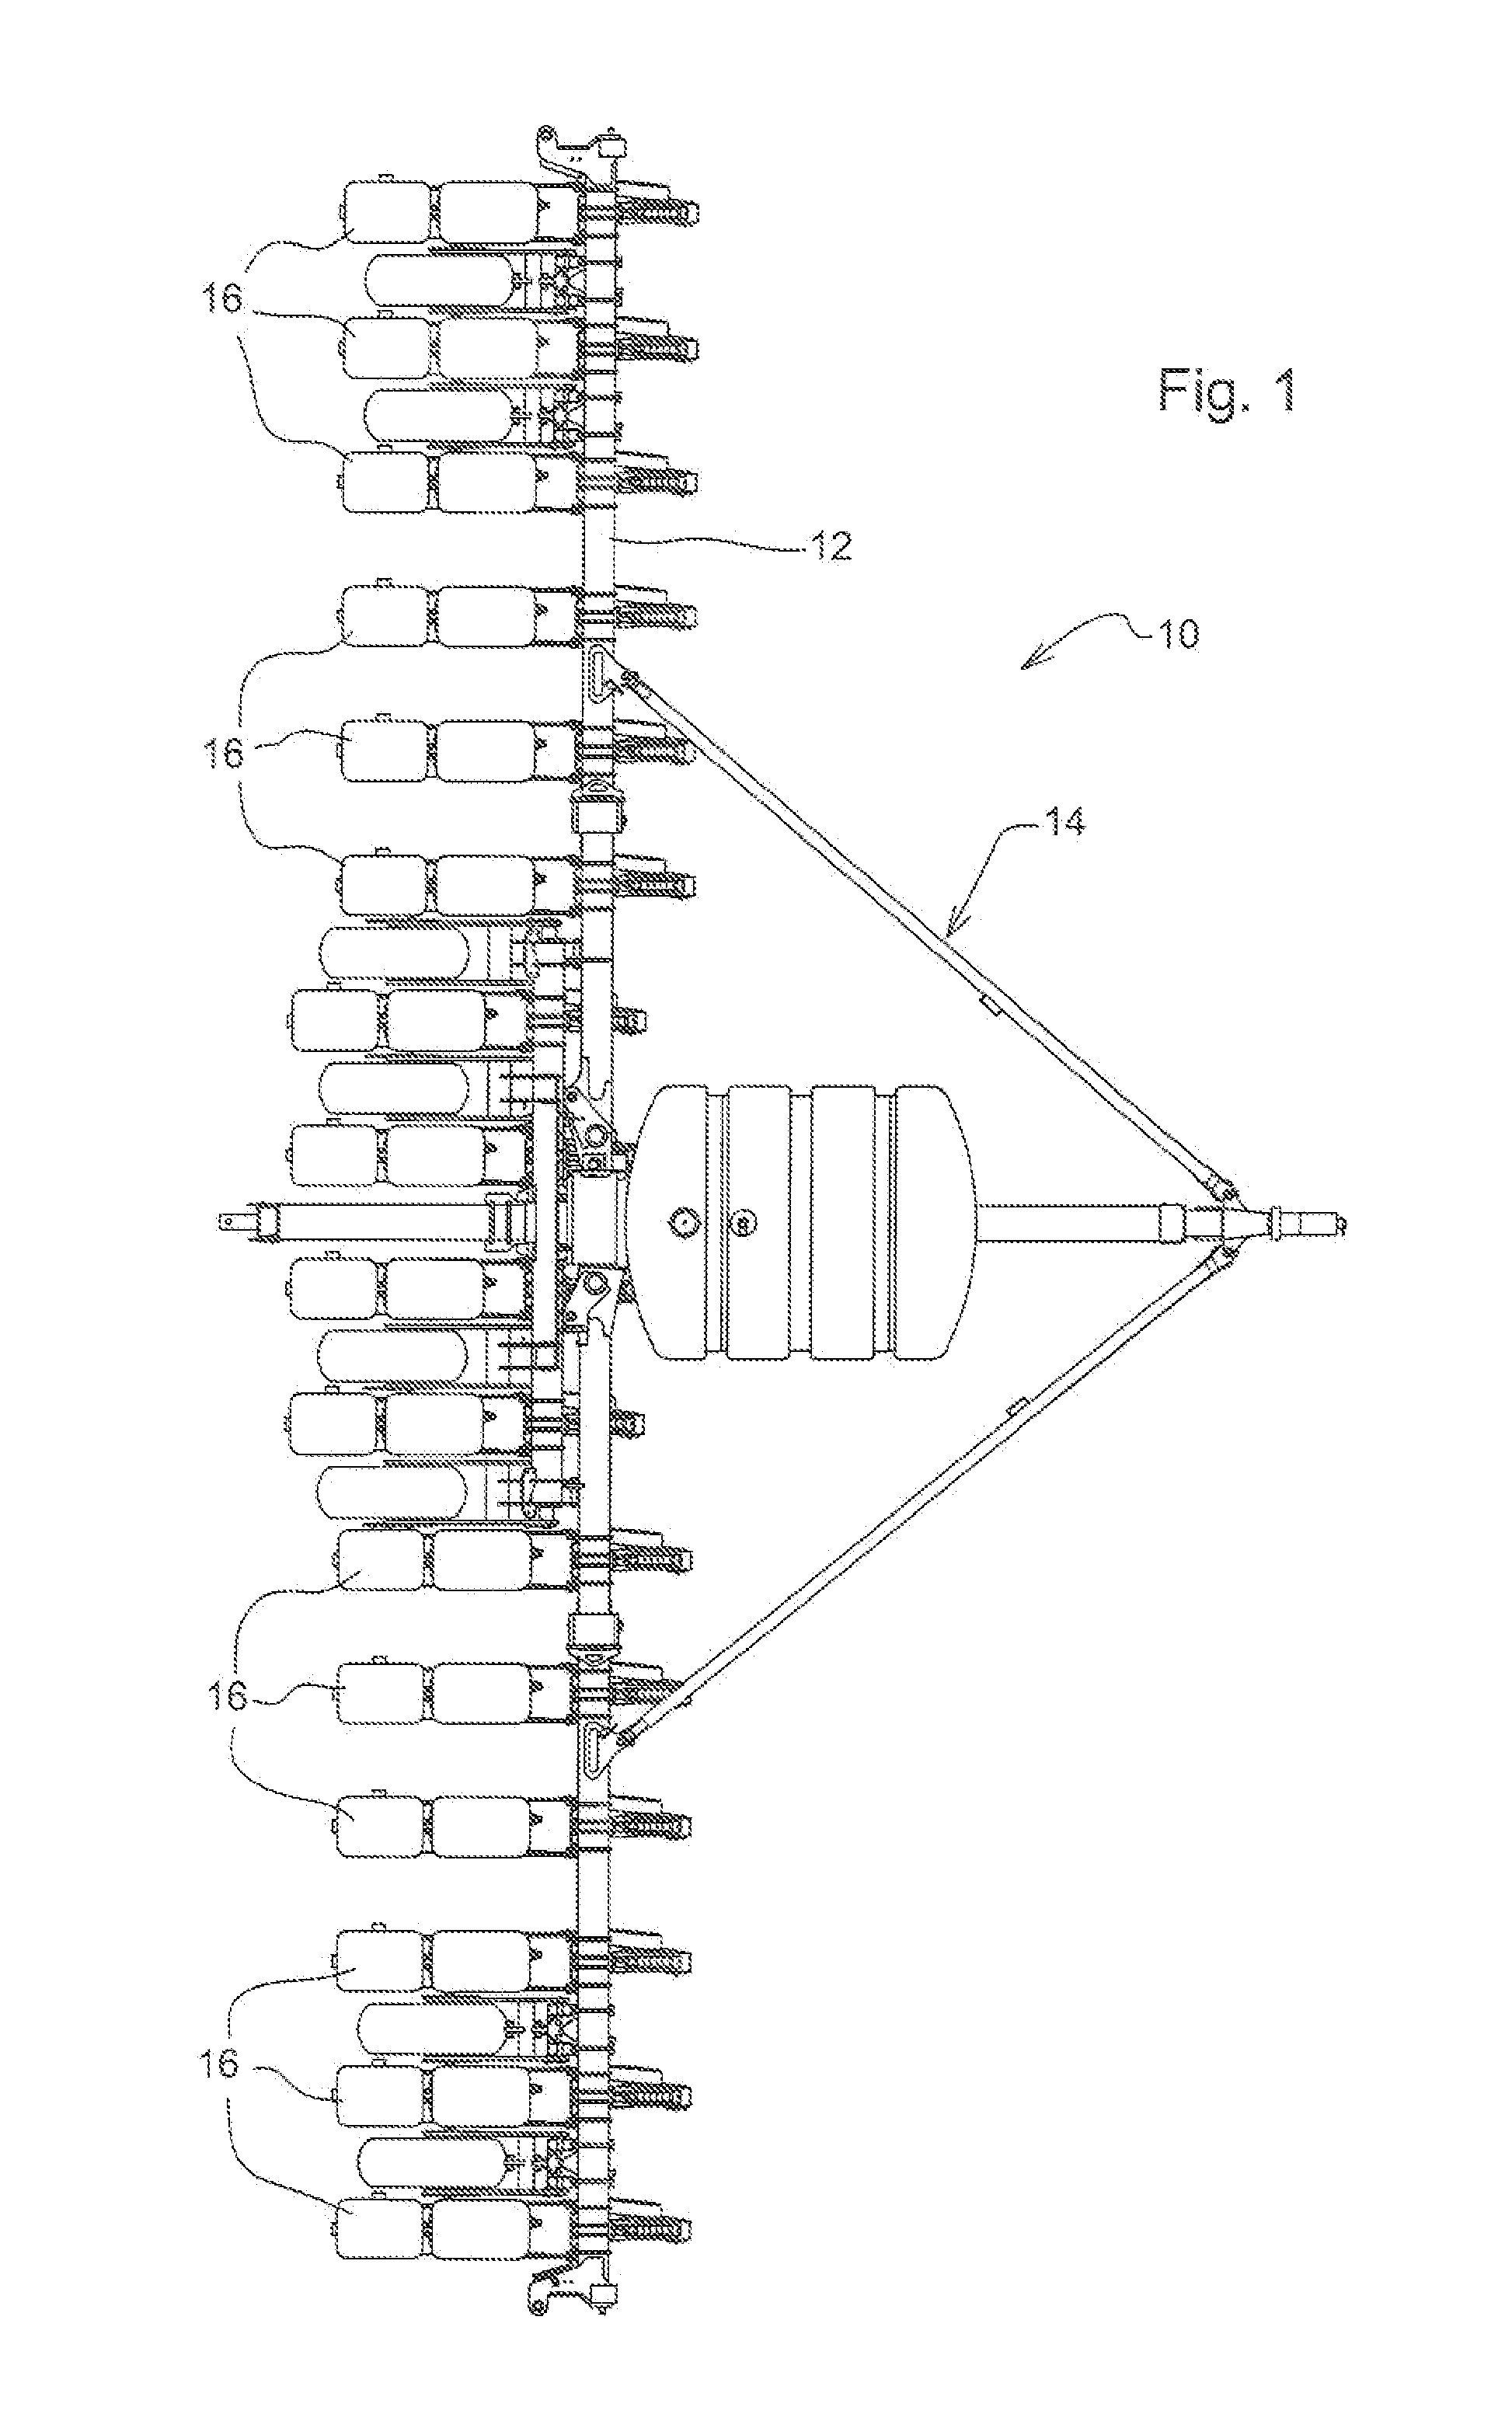 Seeding machine with seed delivery system